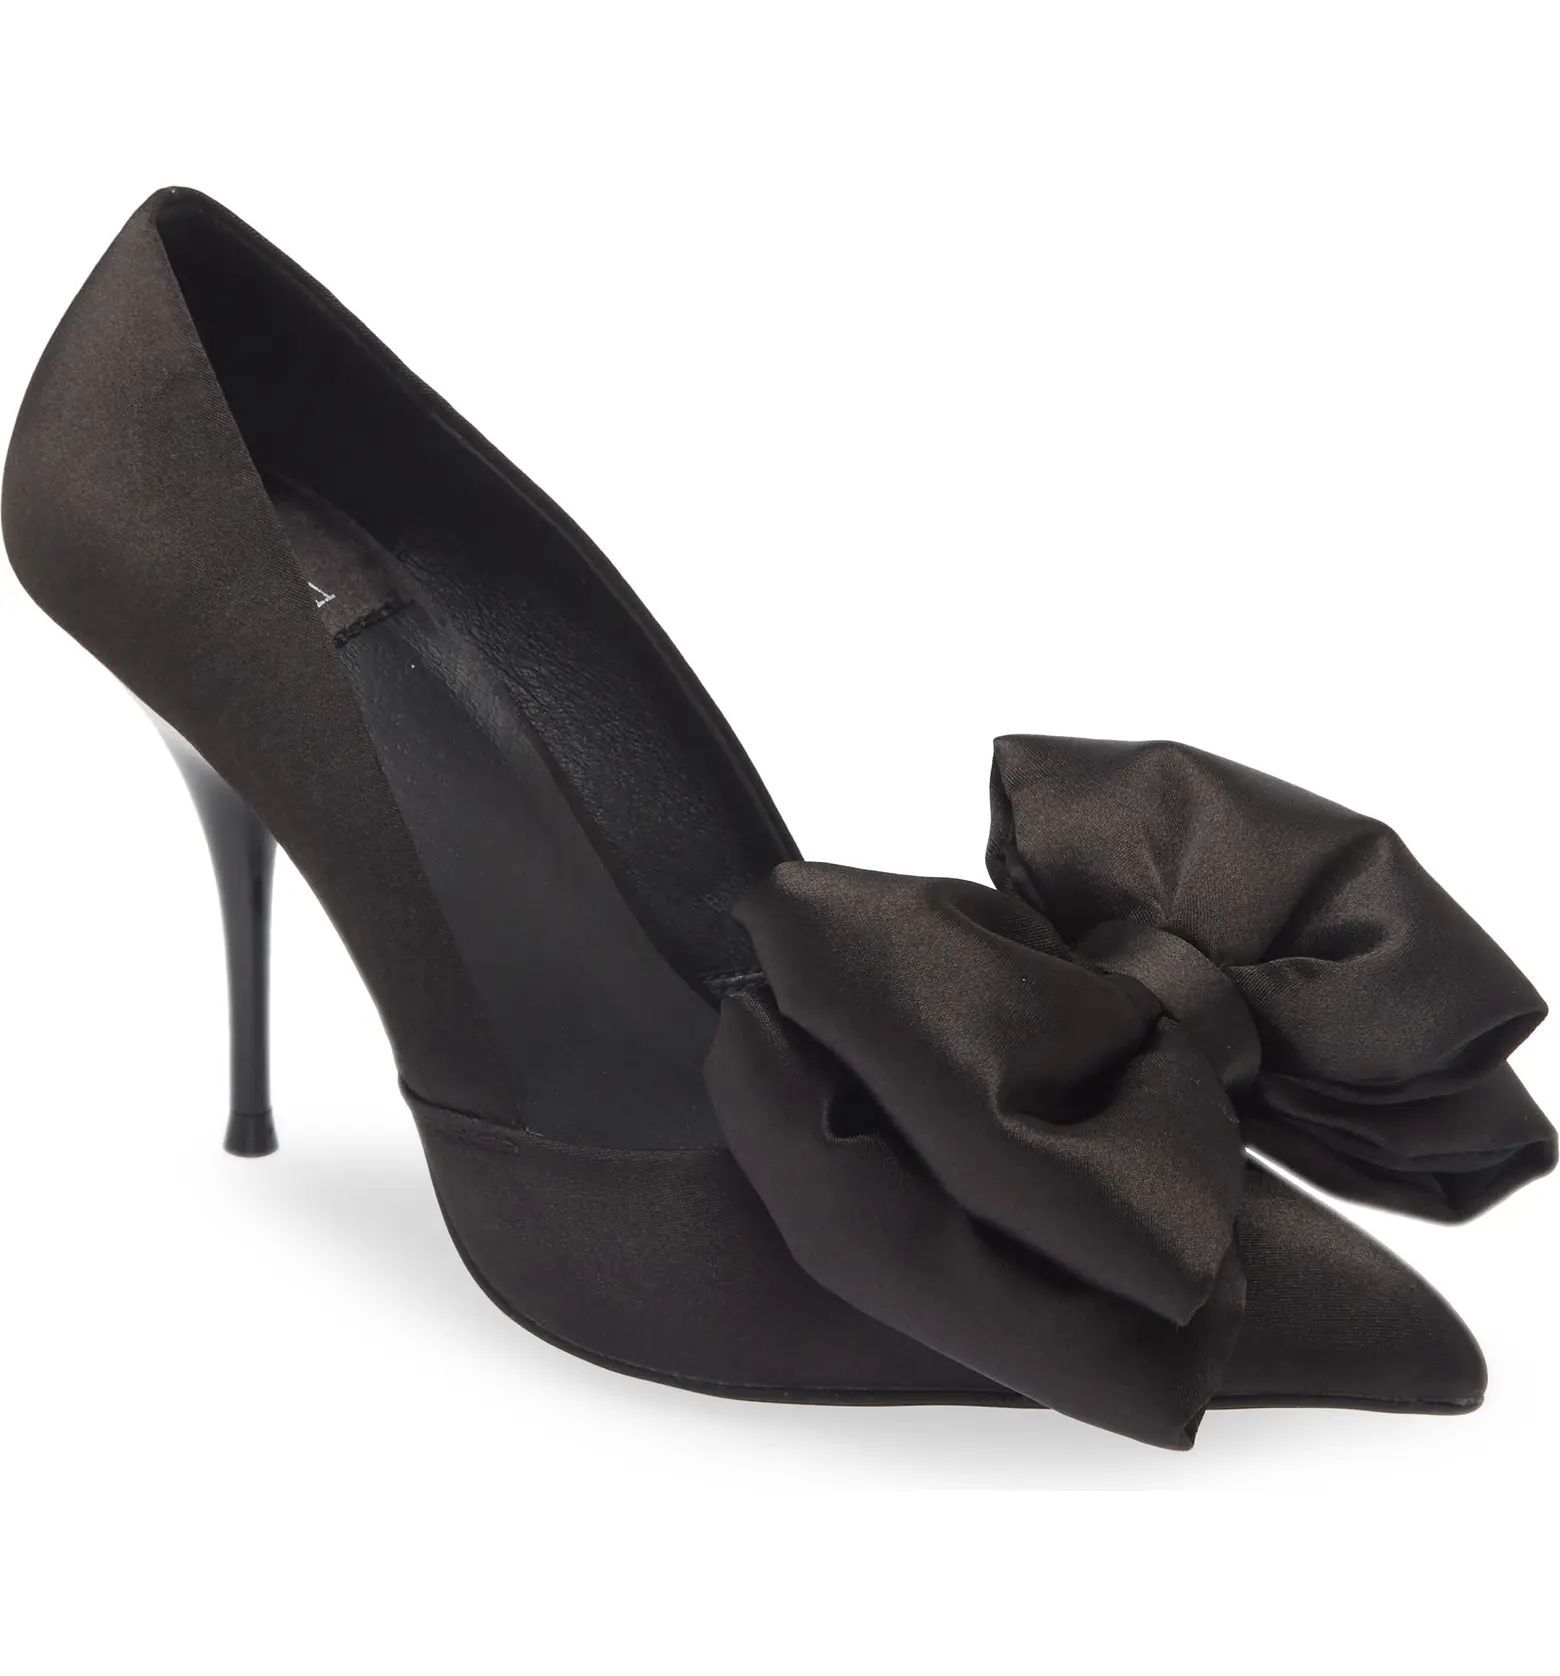 Convince-B Satin Bow Pointed Toe Pump (Women) | Nordstrom